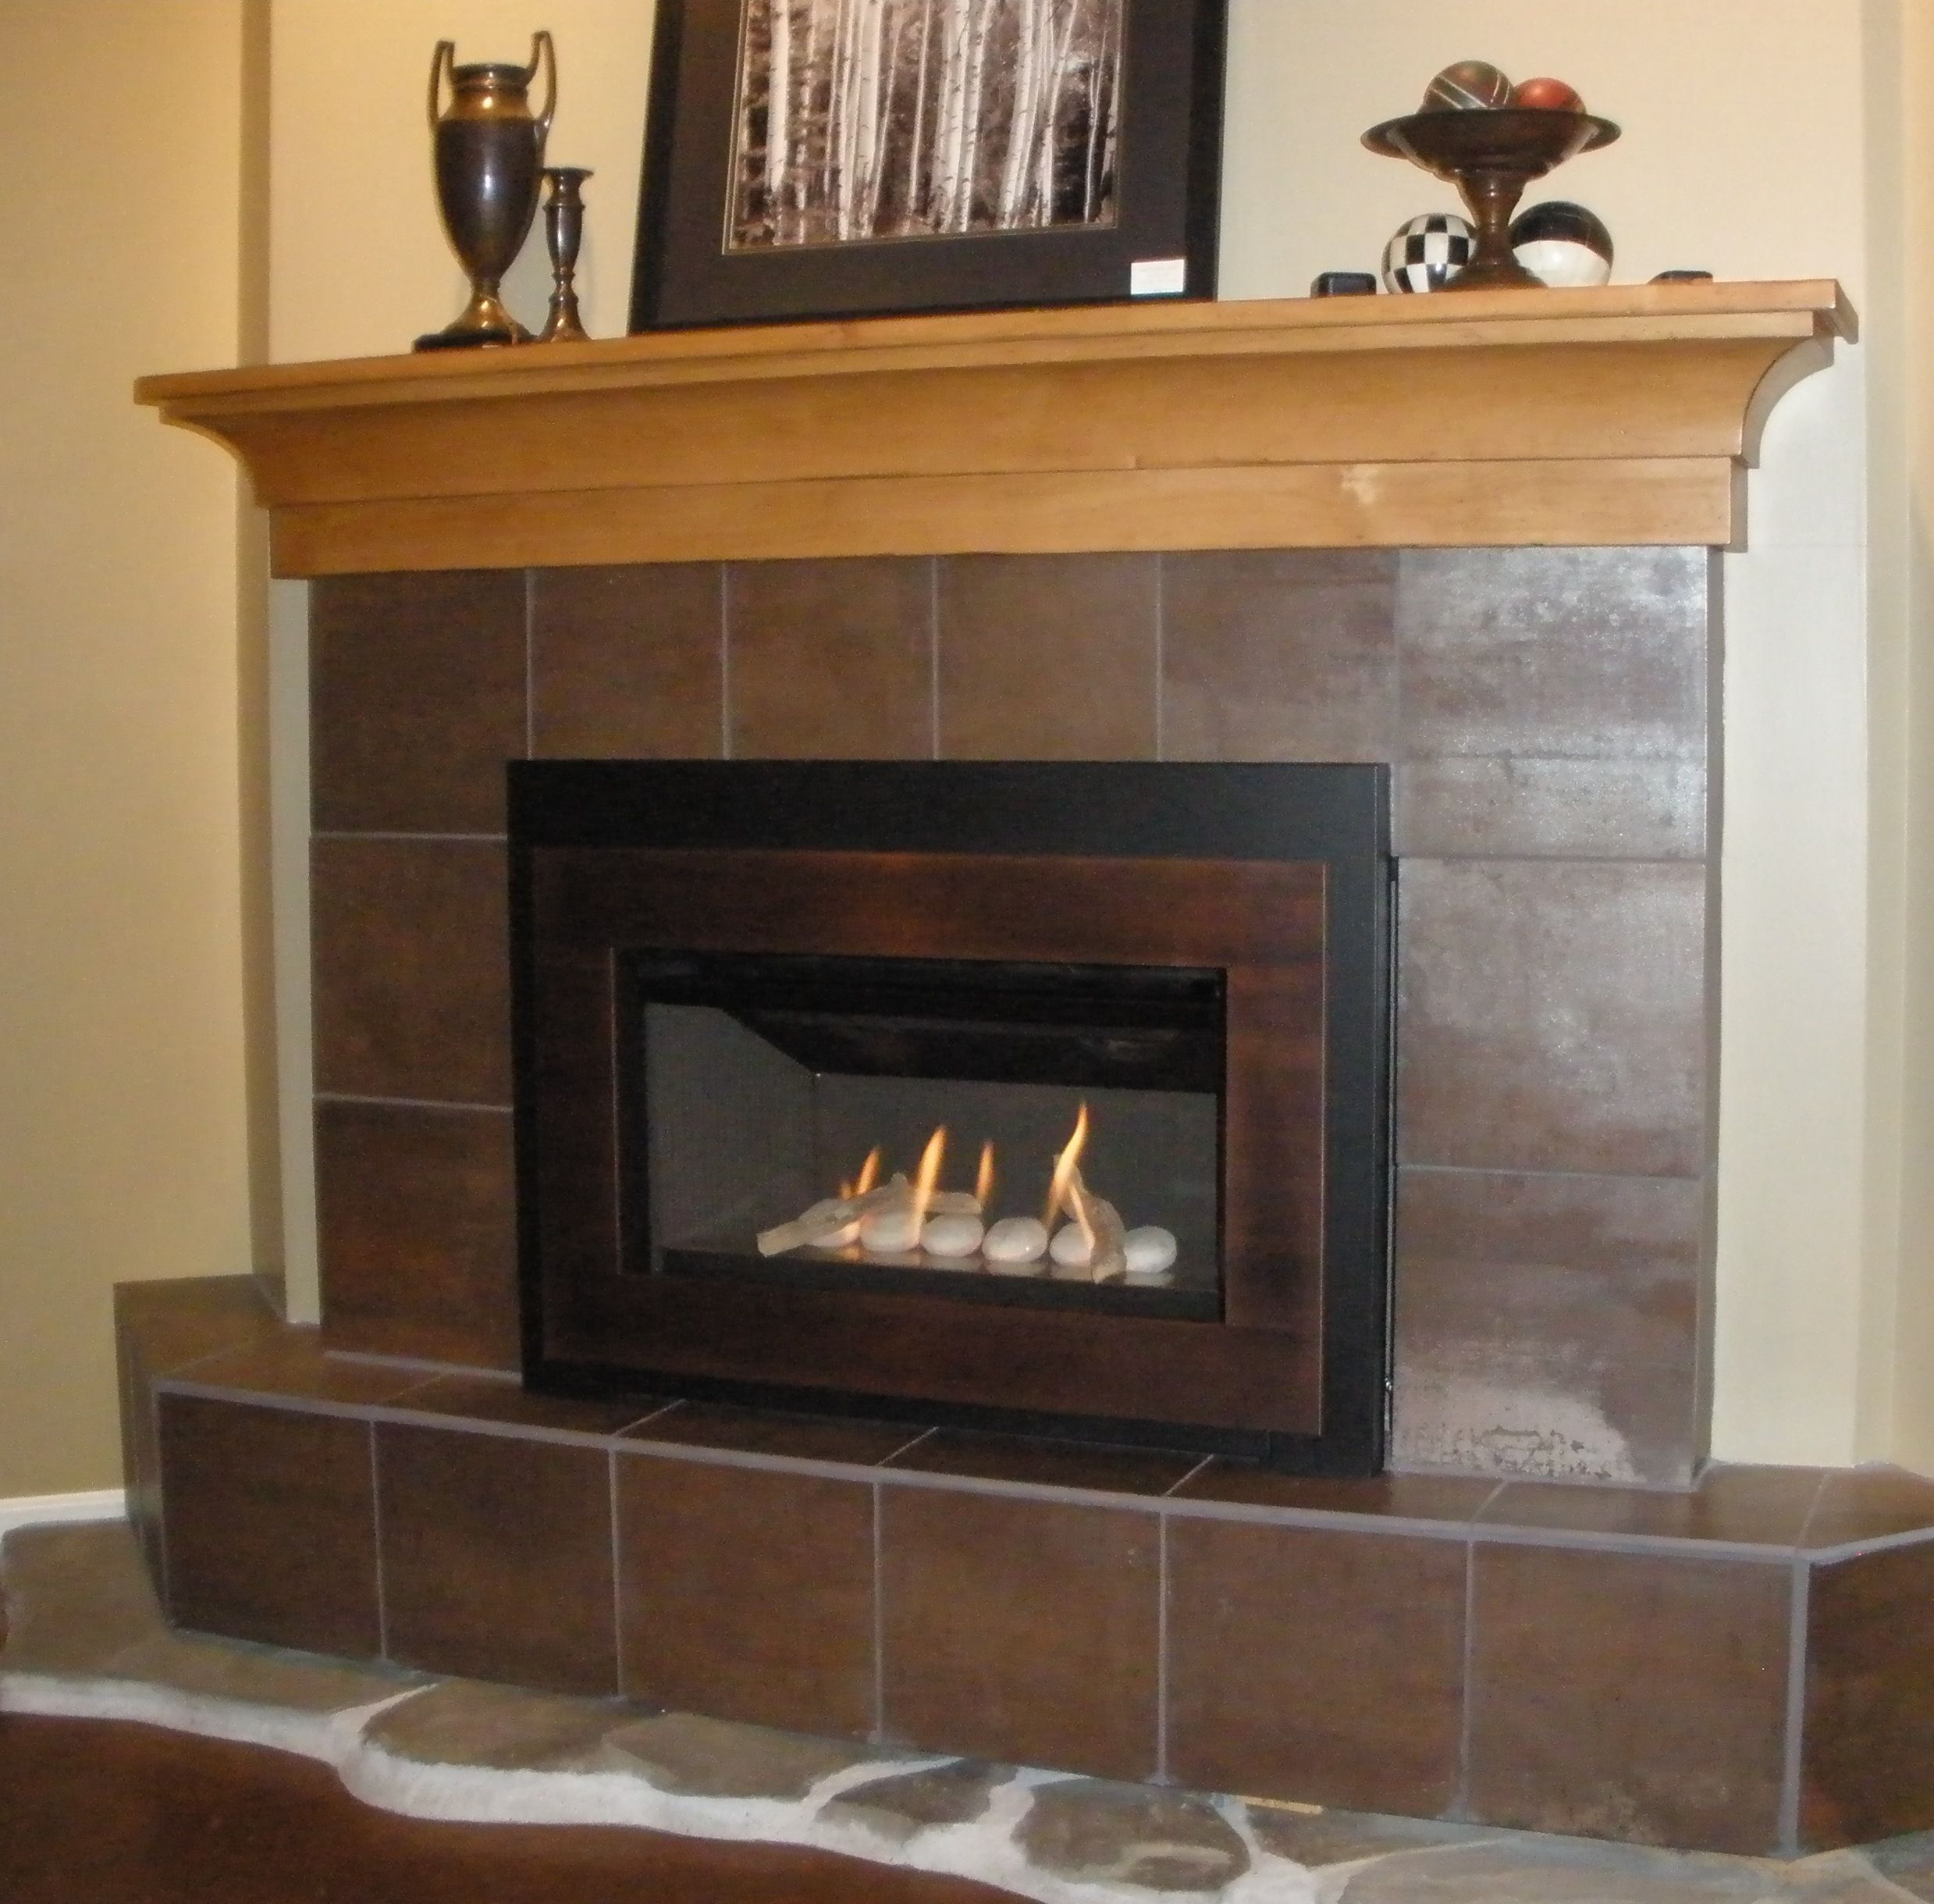 Gas Fireplace Glowing Embers Fresh Pin On Valor Radiant Gas Fireplaces Midwest Dealer